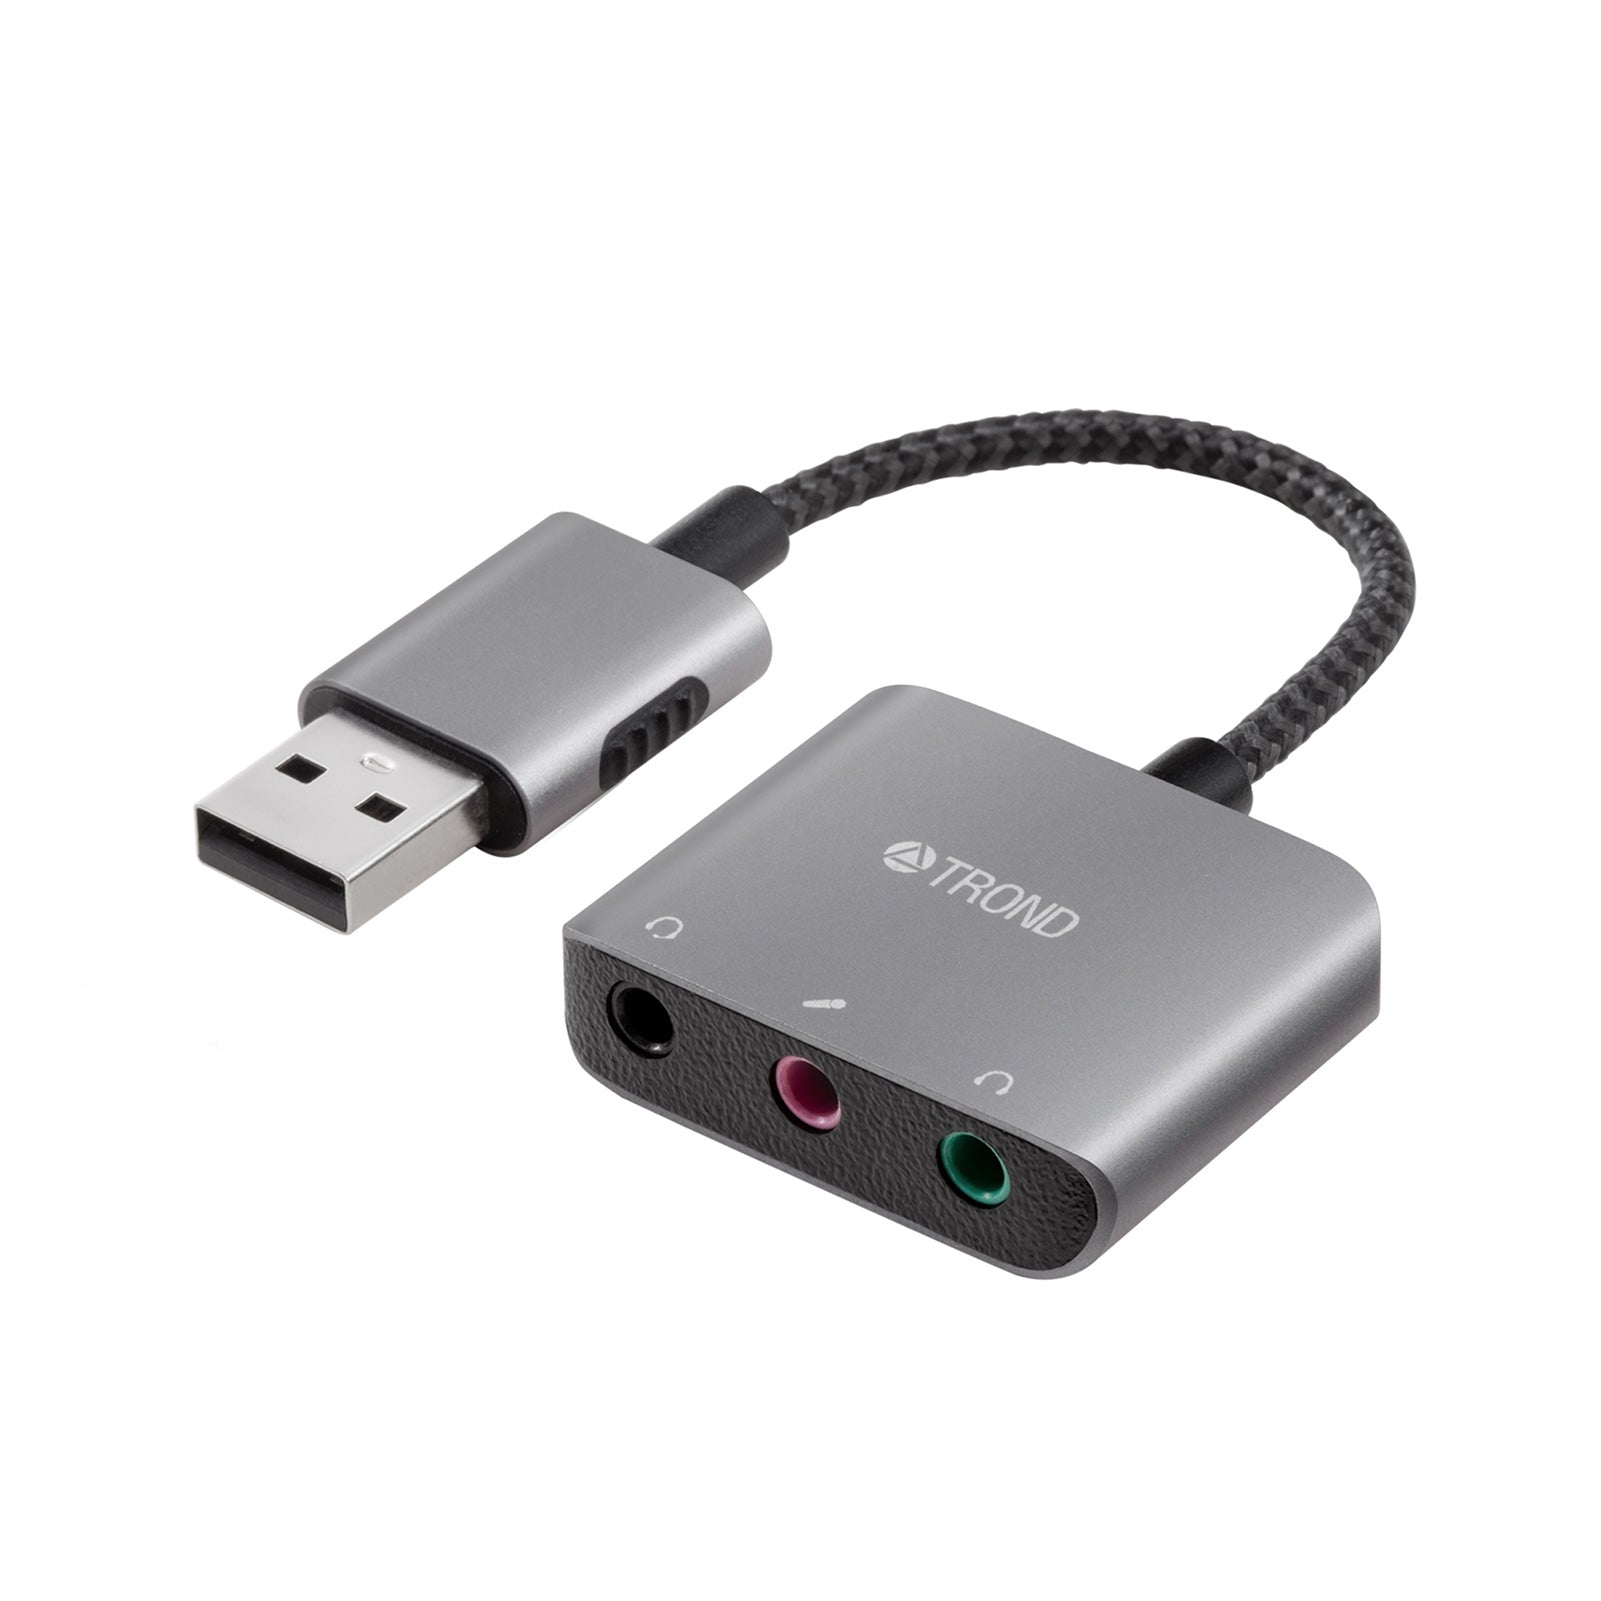 Usb audio out. USB Audio Adapter. USB Sound Adapter. USB 2.0 7.1Ch stereo Sound Card Adapter. TRS to USB.